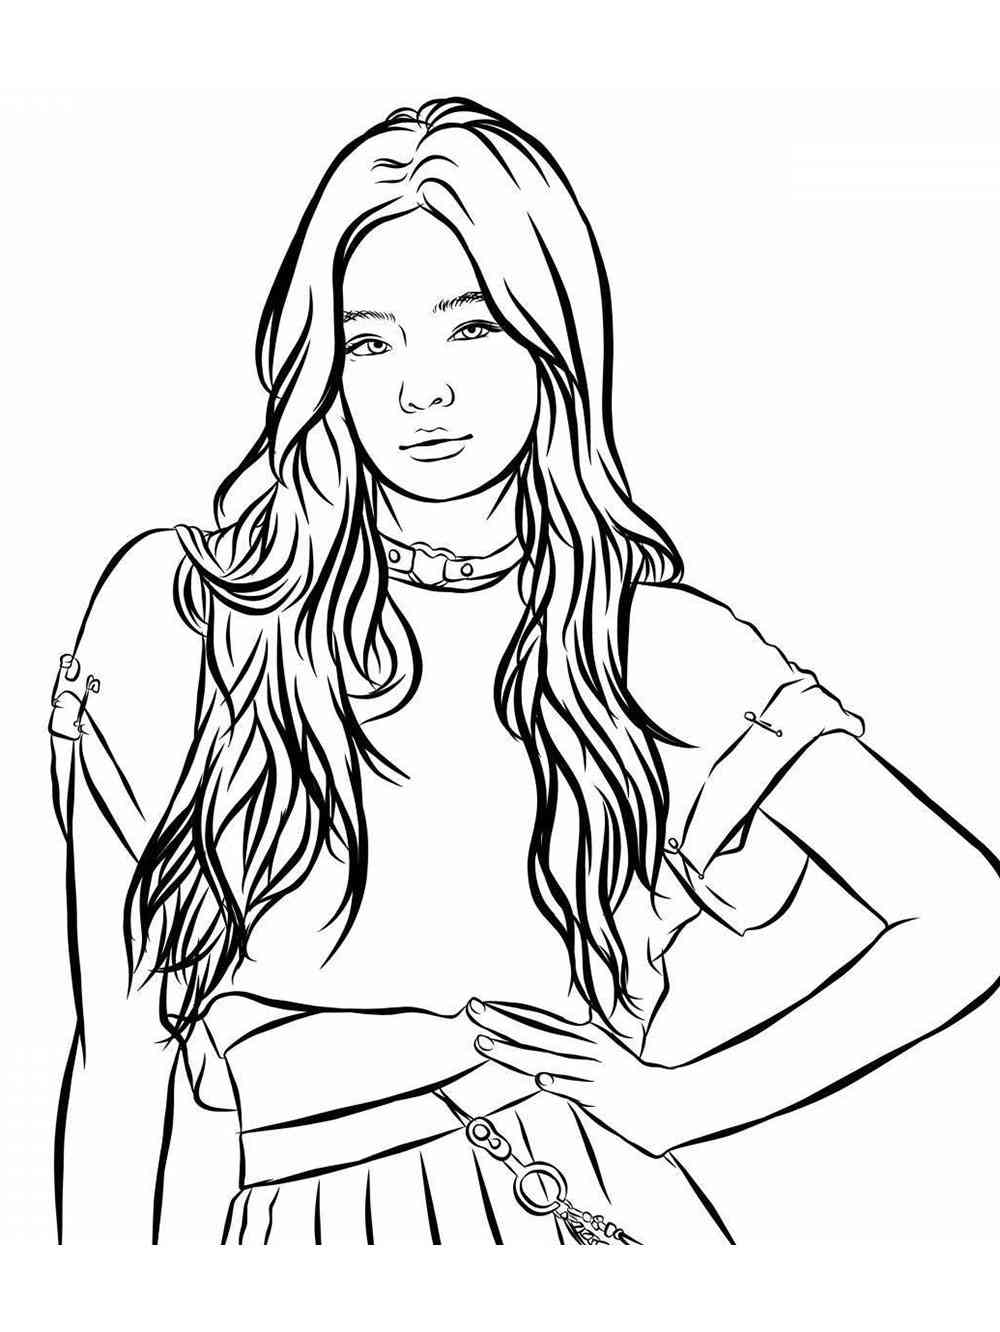 BlackPink coloring pages